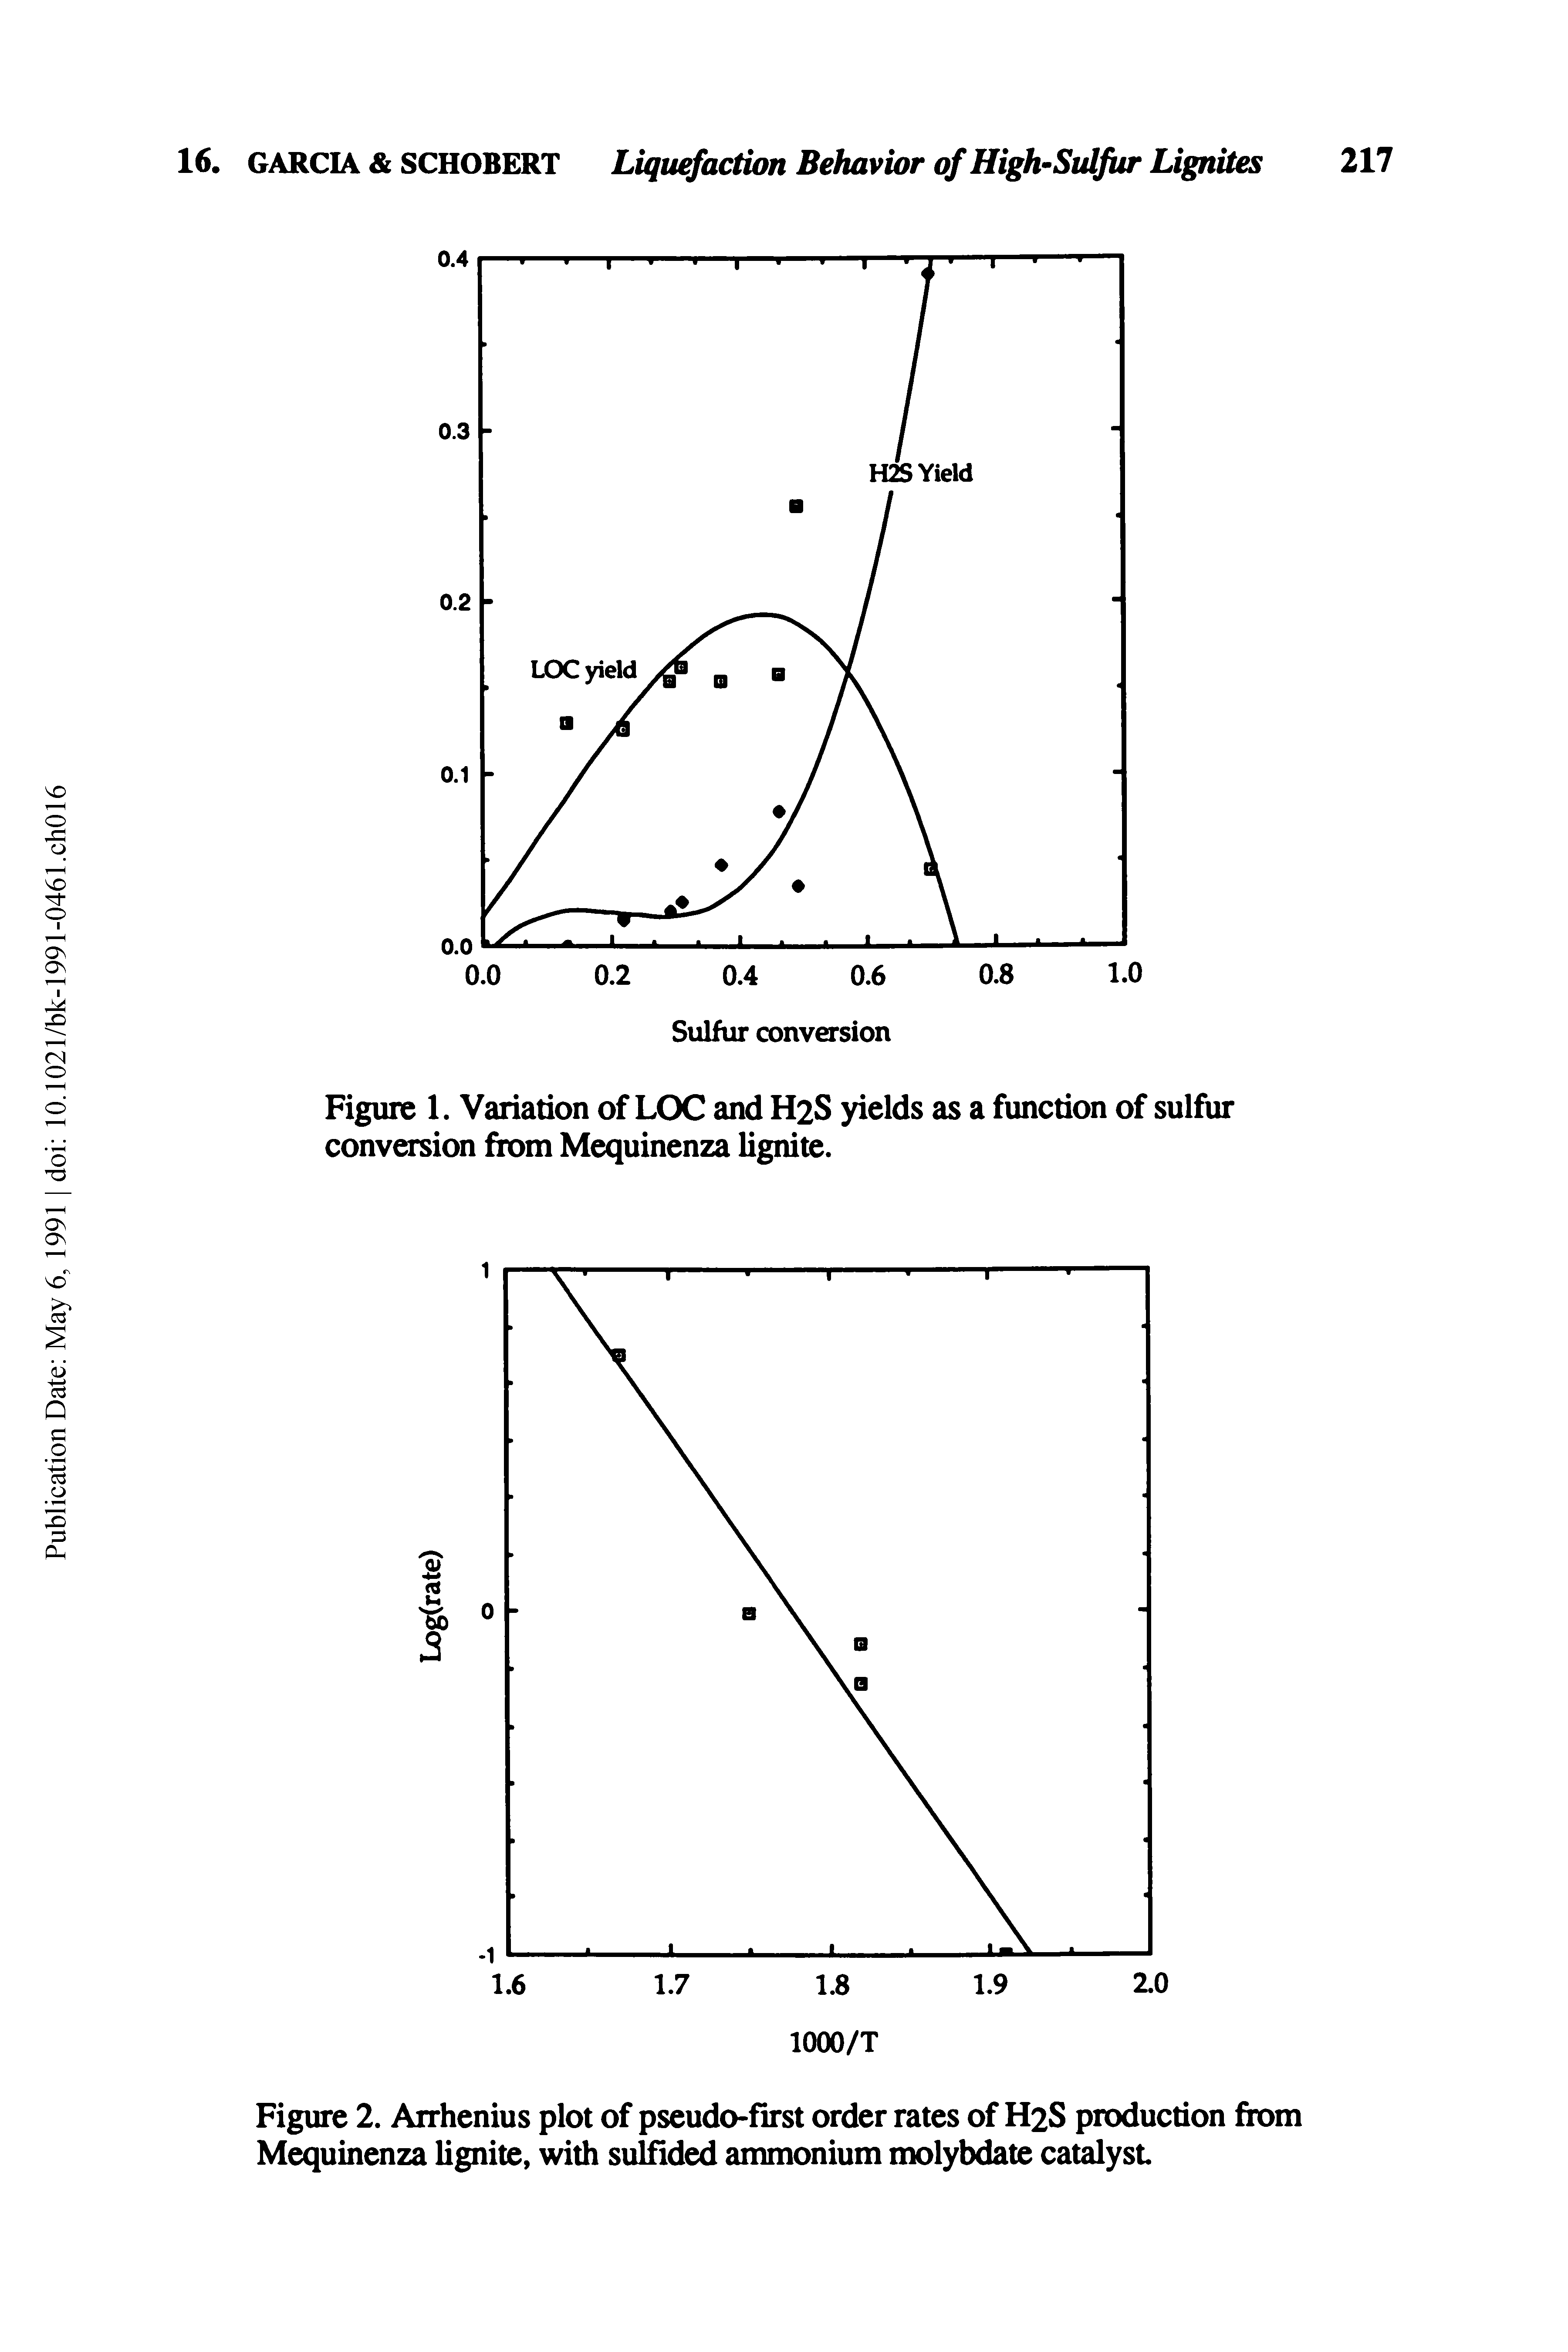 Figure 2. Arrhenius plot of pseudo-first order rates of H2S production from Mequinenza lignite, with sulfided ammonium molybdate catalyst...